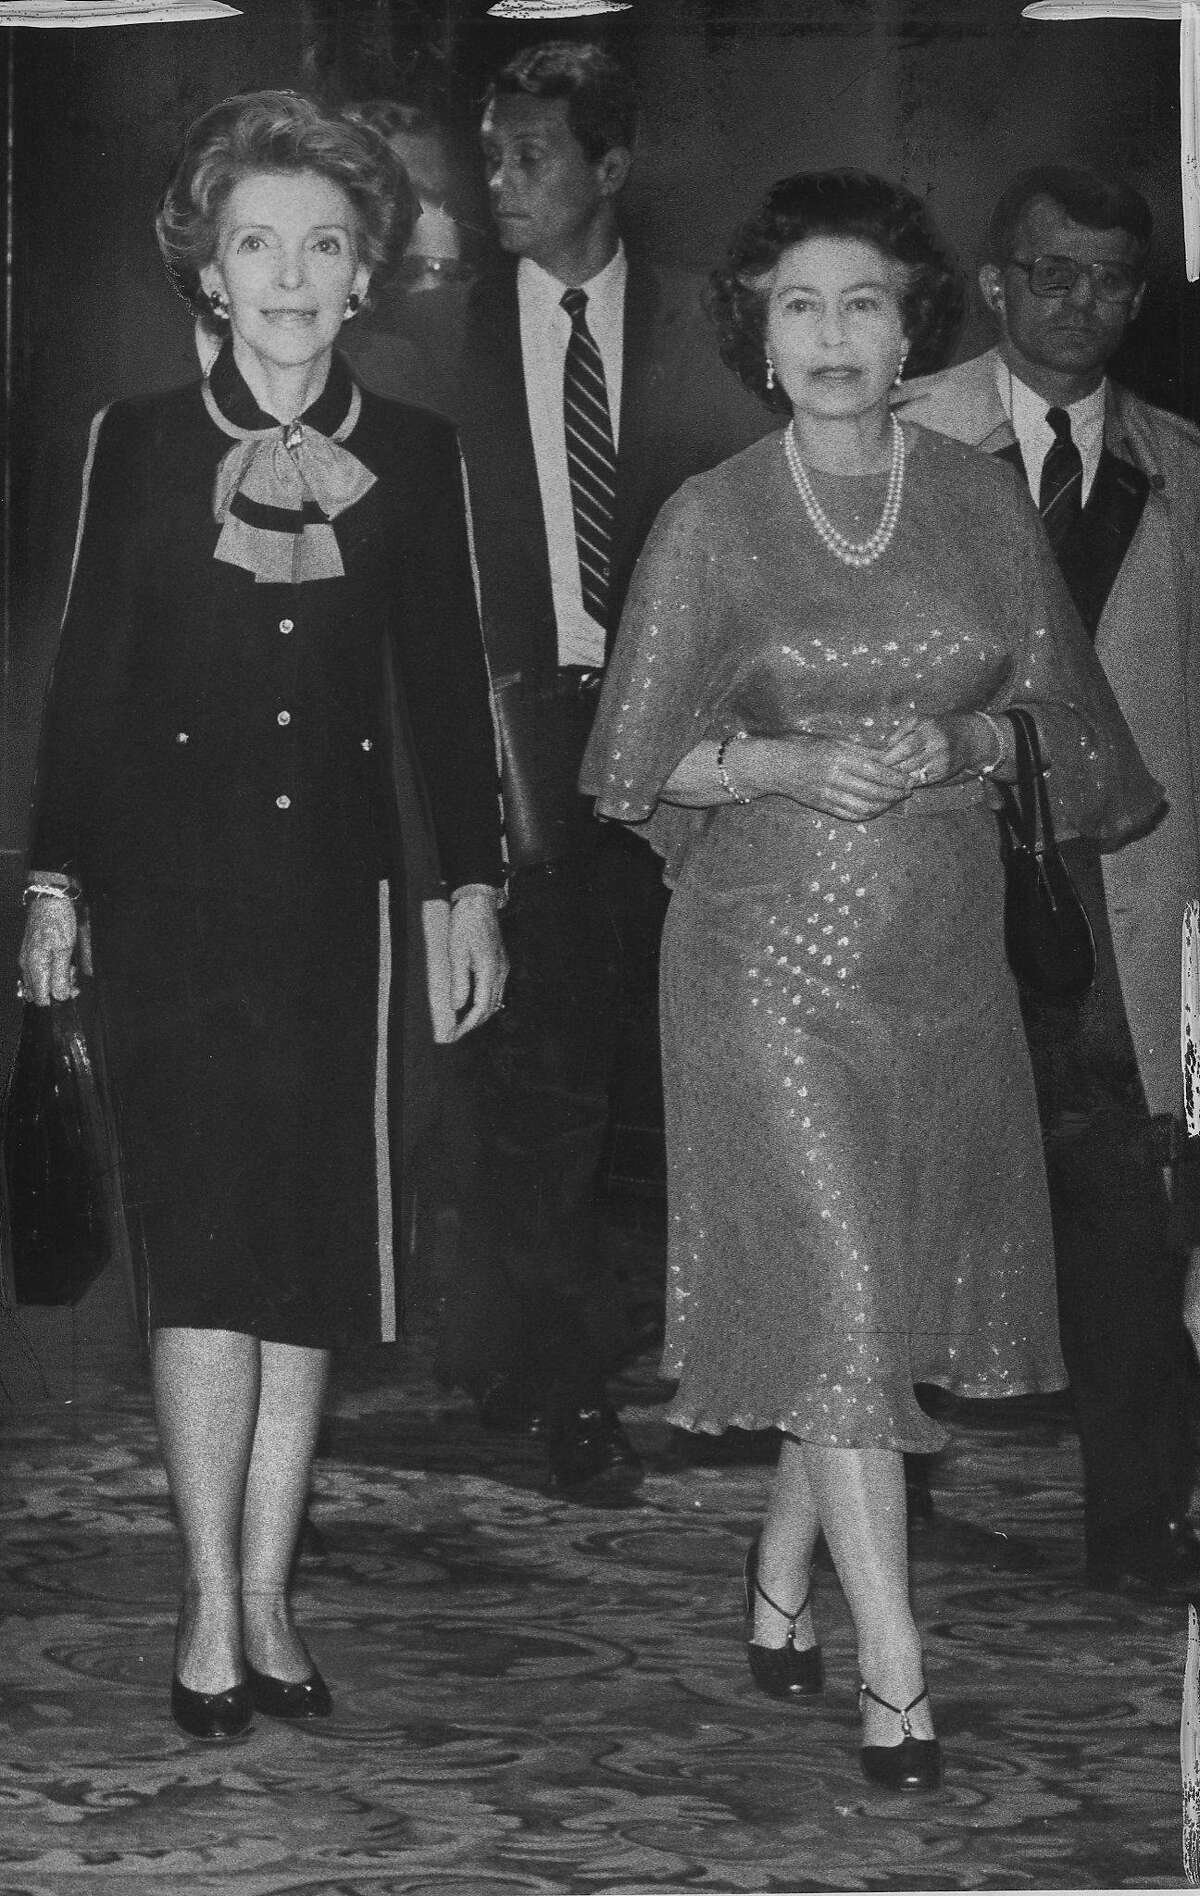 Queen Elizabeth II of Great Britain visits San Francisco. She is seen here with First lady Nancy Reagan in the St Francis Hotel lobby, on their way to dinner, March 2, 1983 Photo ran 03/03/1983, p. 21